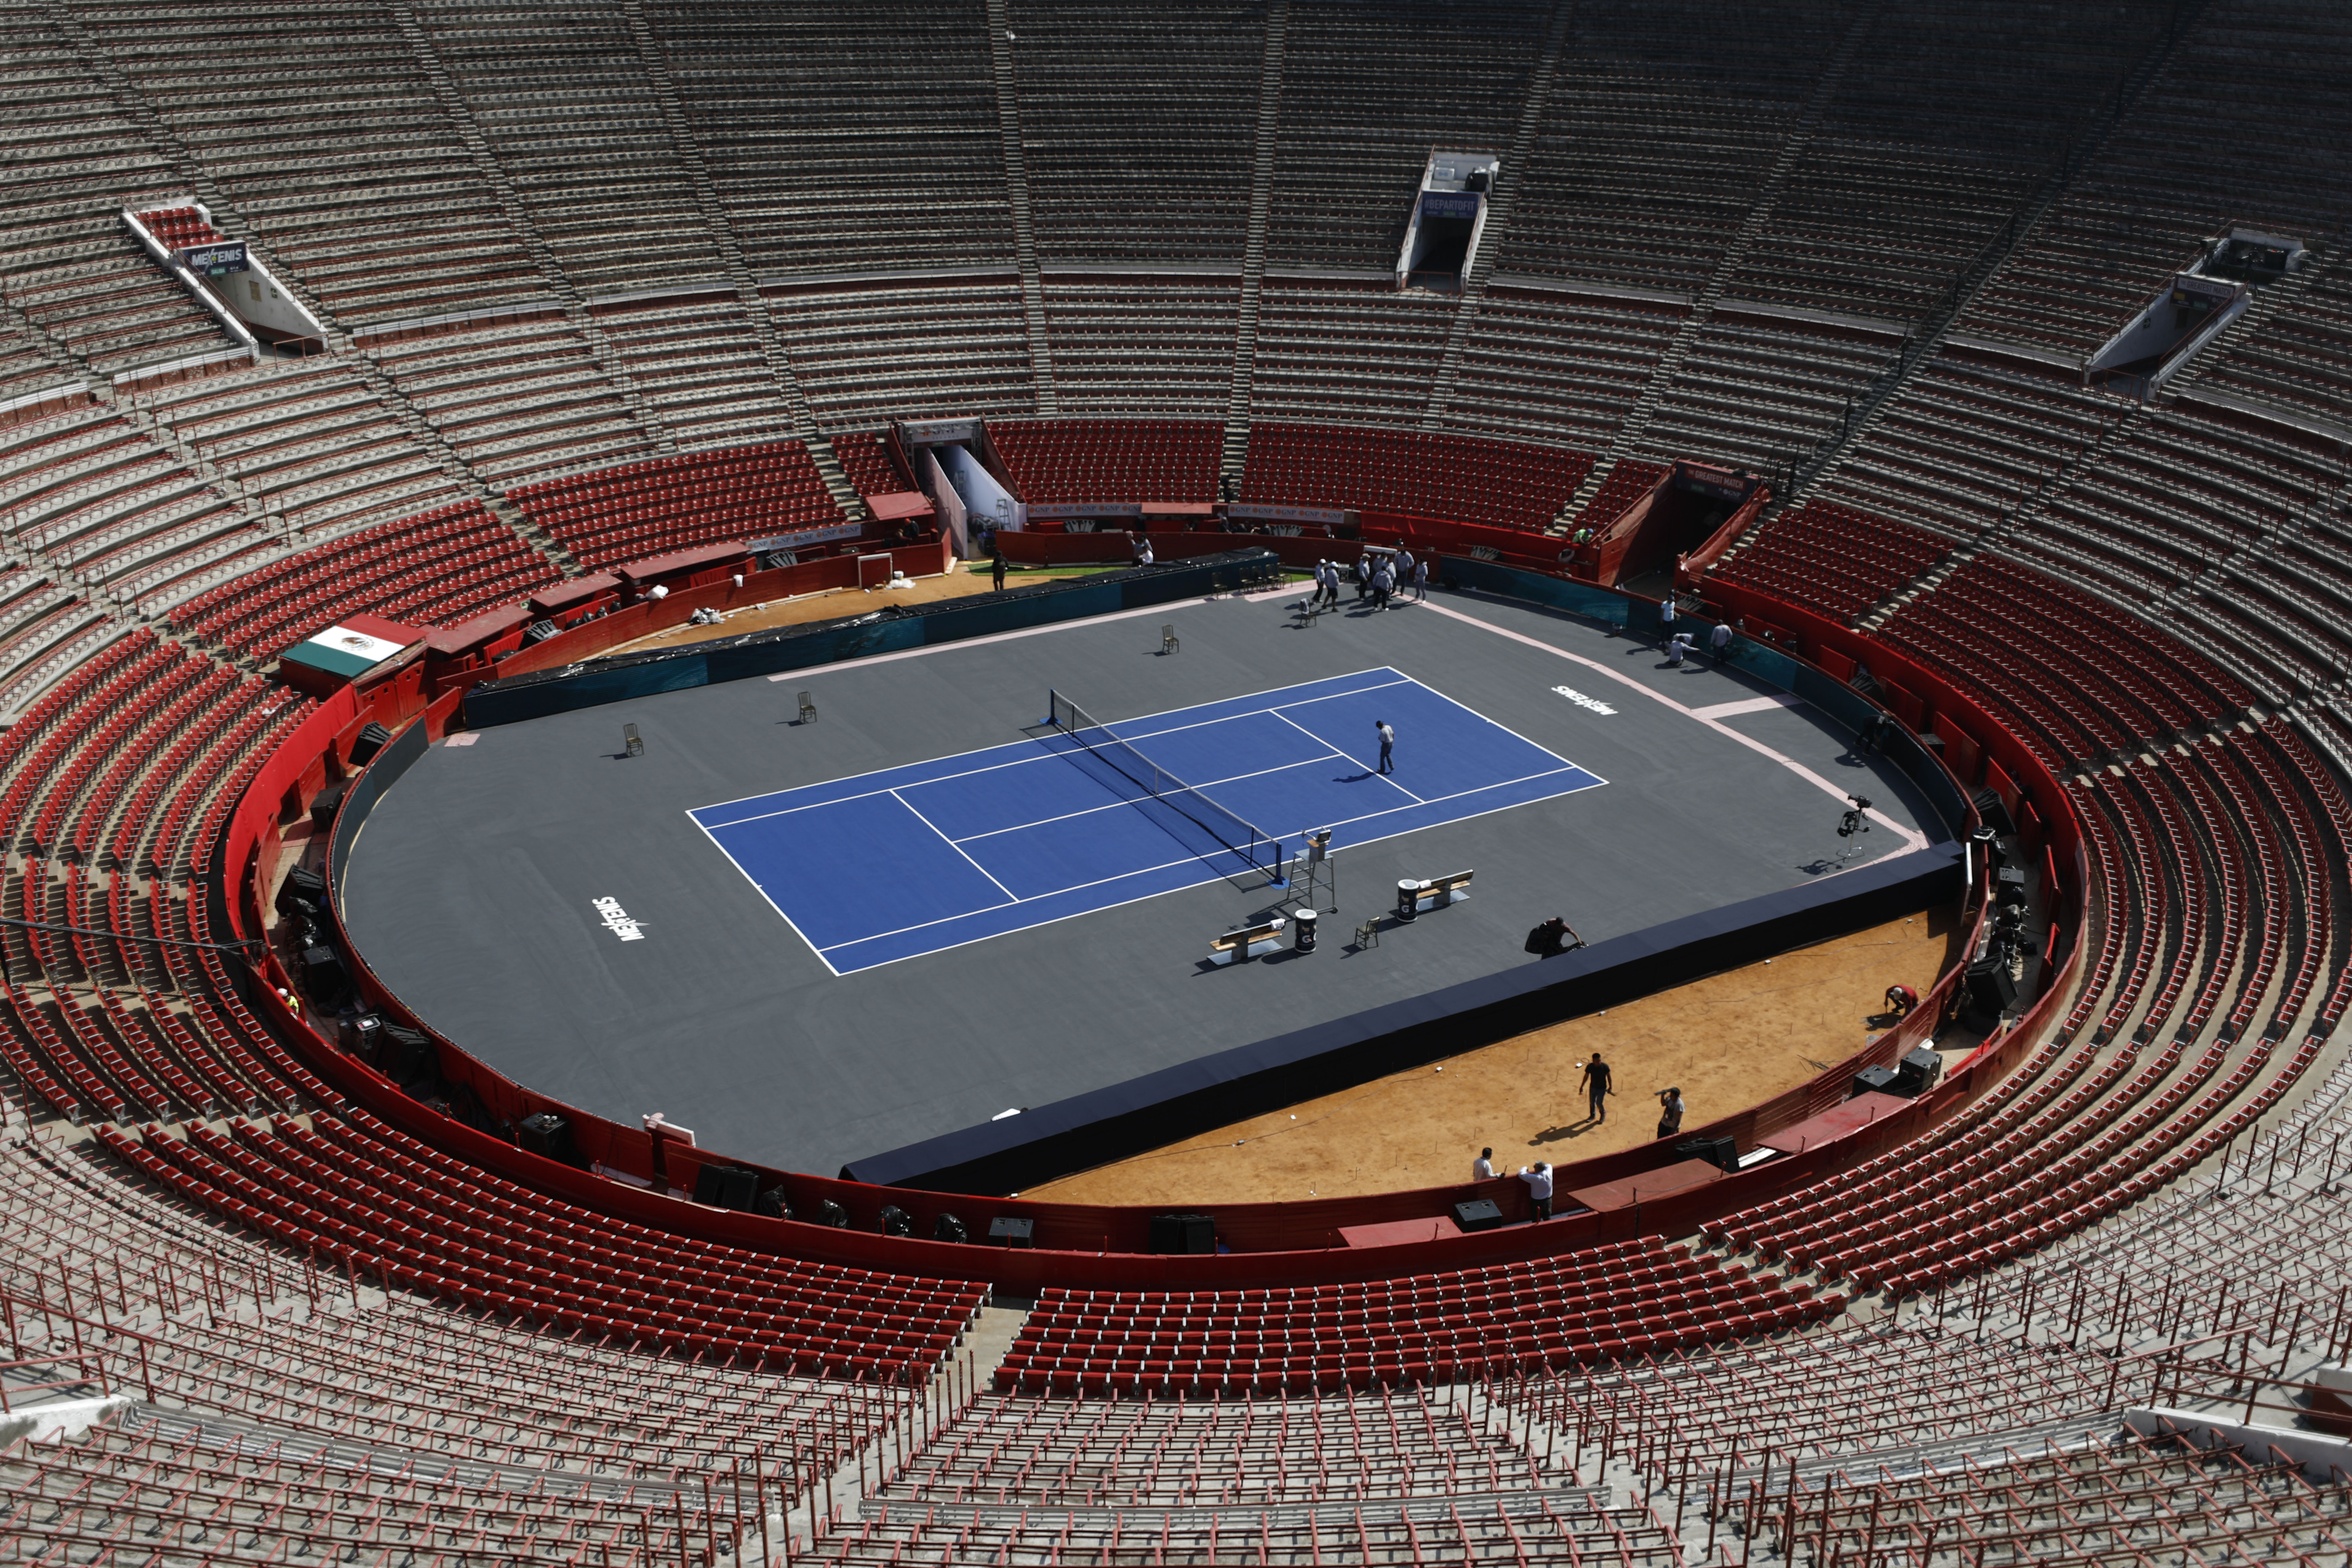 Workers add the finishing touches at the Plaza de Toros bullfighting ring that has been converted into a tennis court to host an exhibition tennis match between Swiss great Roger Federer and German rival Alexander Zverev, in Mexico City, Friday, Nov. 22, 2019. (AP Photo/Rebecca Blackwell)